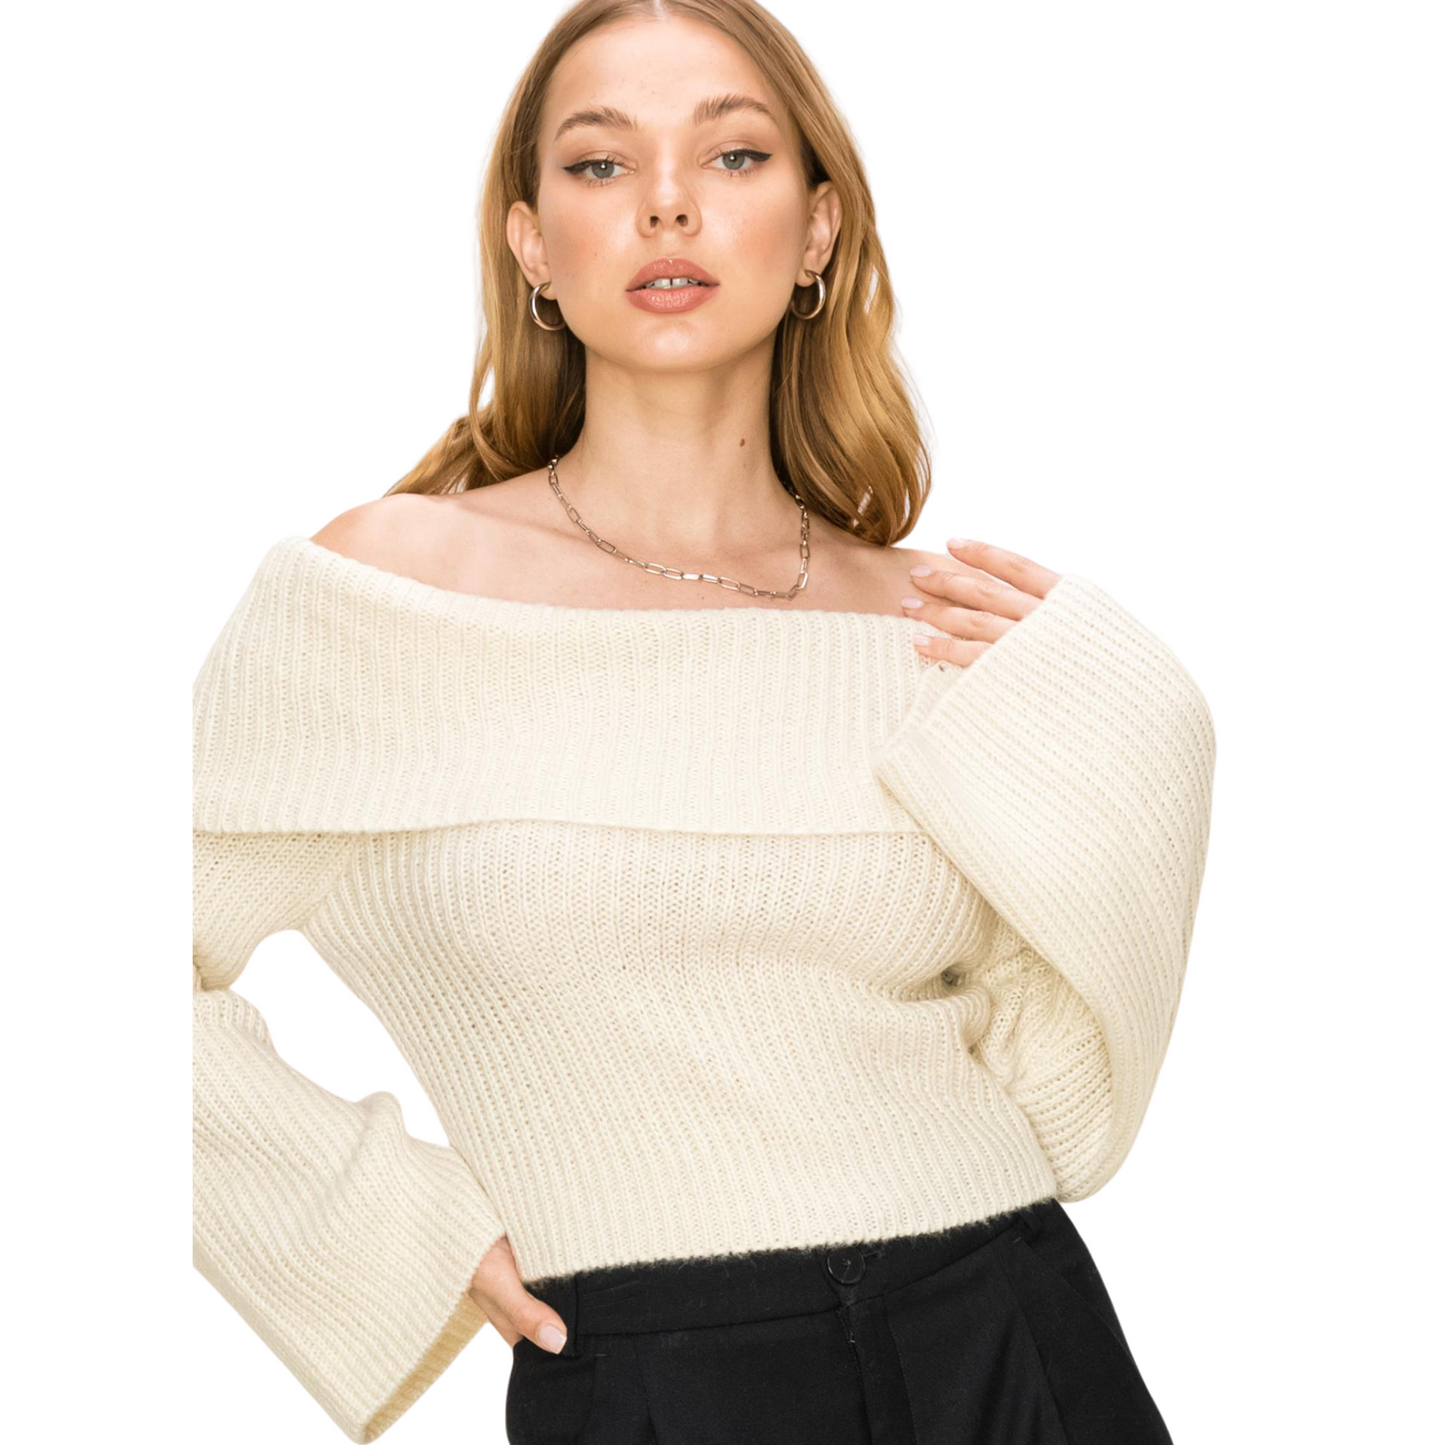 Hyfve Knit Turtle Neck Sweater W/ Bell Sleeves (3 Colors! S-L)